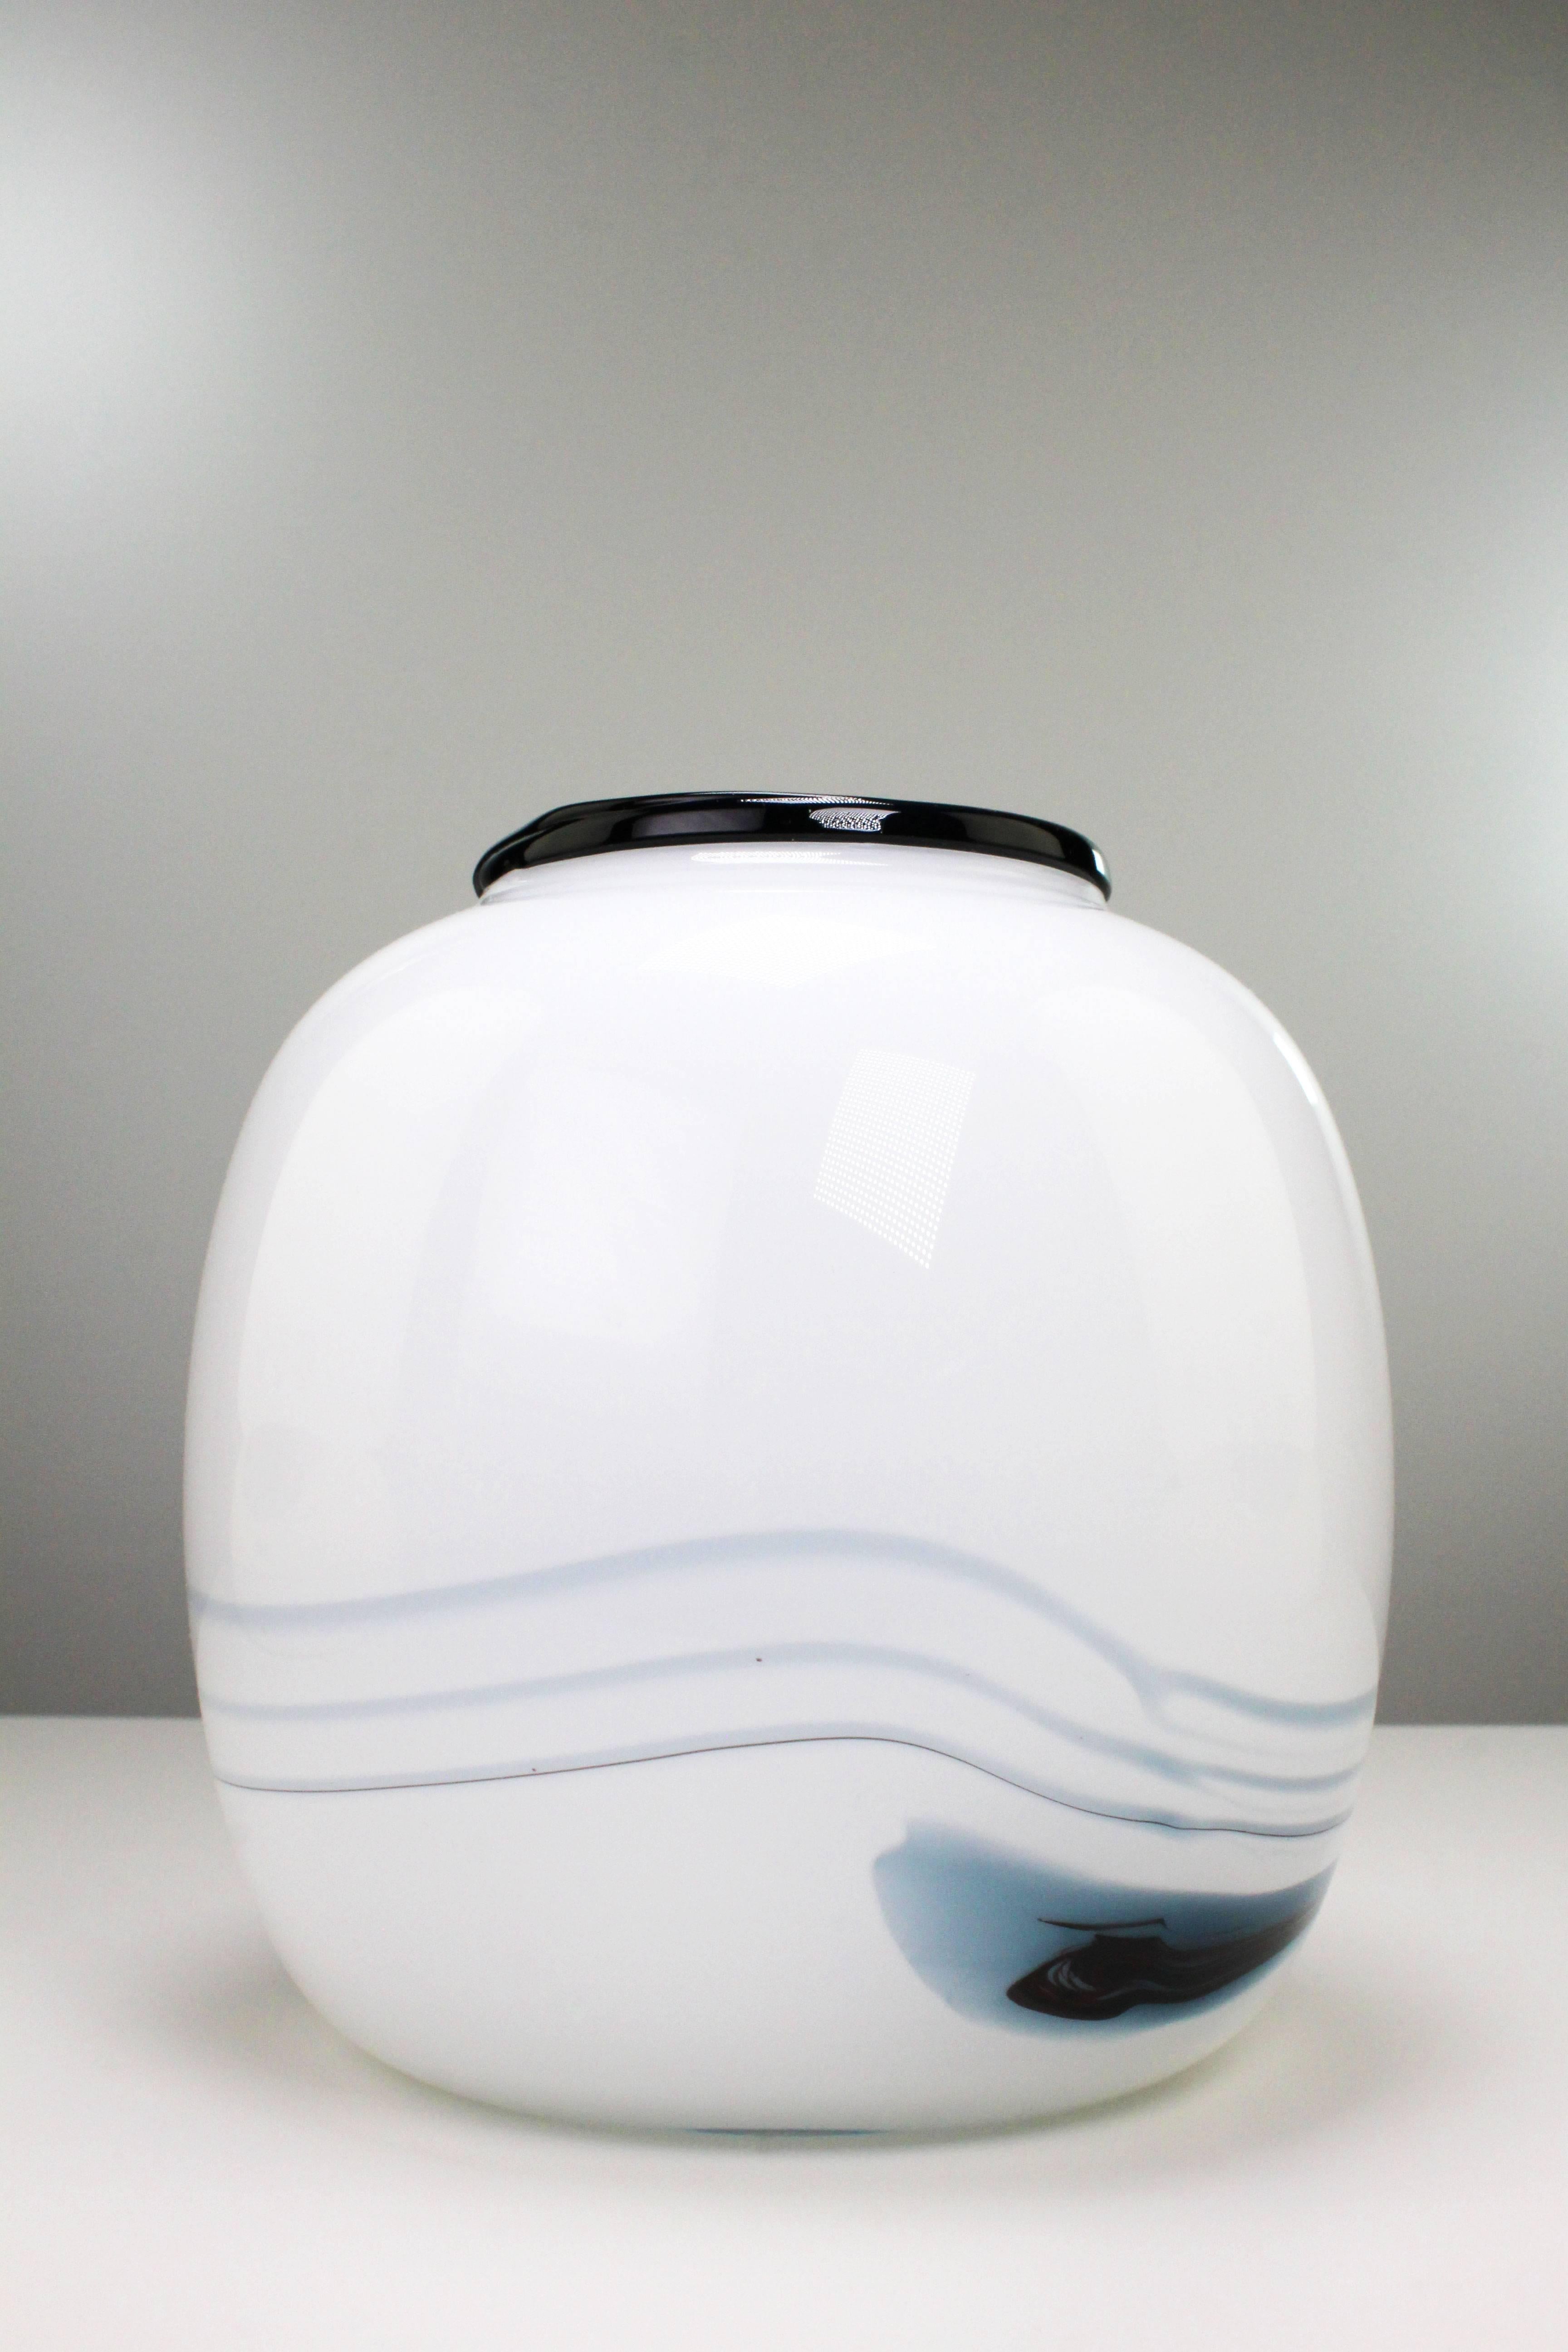 Danish modern smooth round vase with smoky blue and black pattern in milky white glass. From the series Atlantis by art glass designer Michael Bang for Danish Holmegaard. Beautiful, unused condition. Manufactured in the town of Næstved on Southern